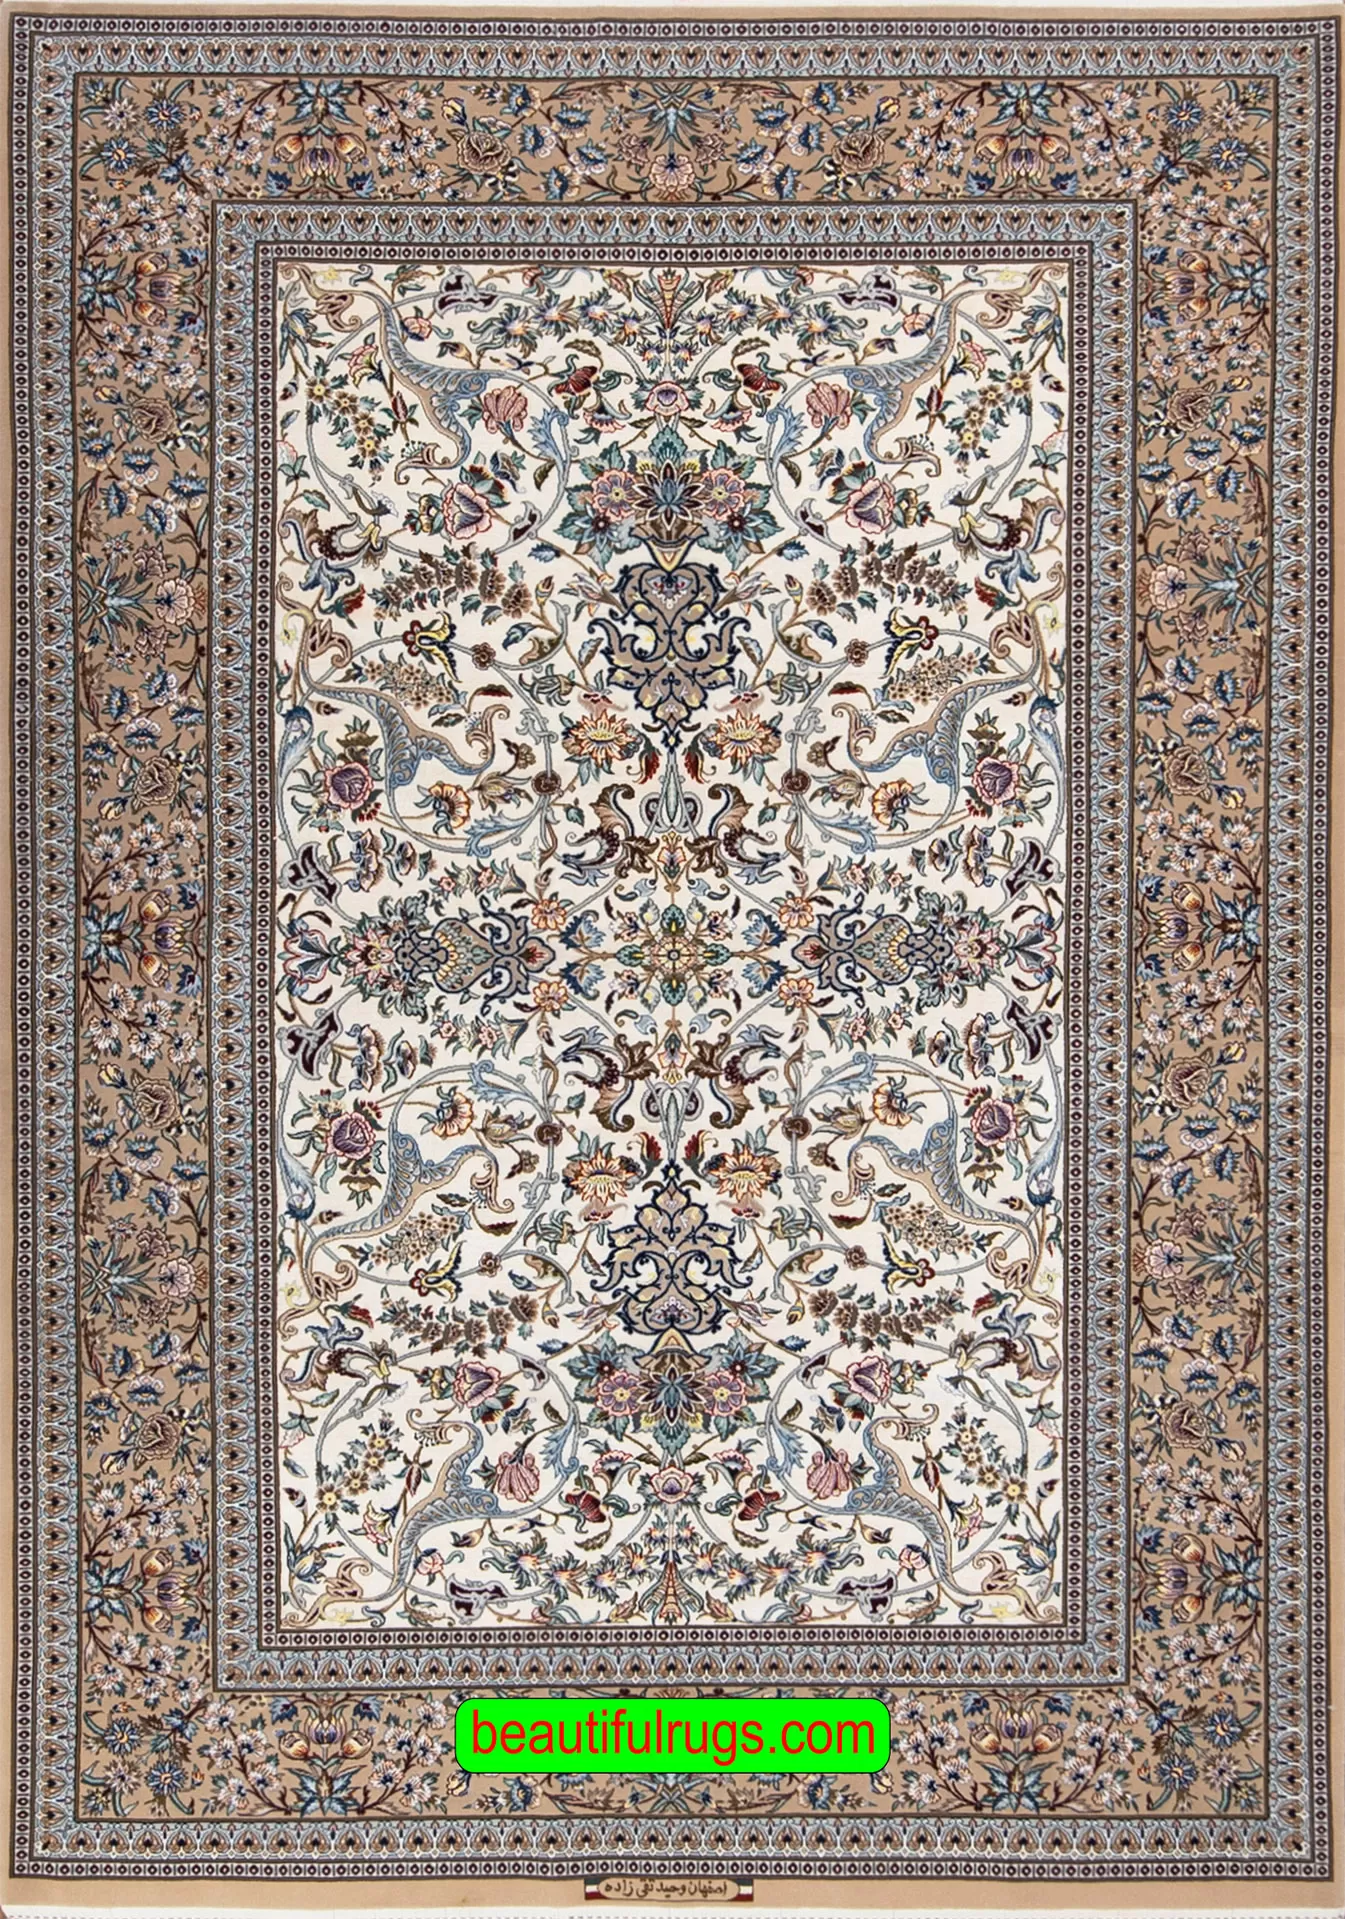 Beige color Persian Isfahan silk and wool rug. Size 5x7.6